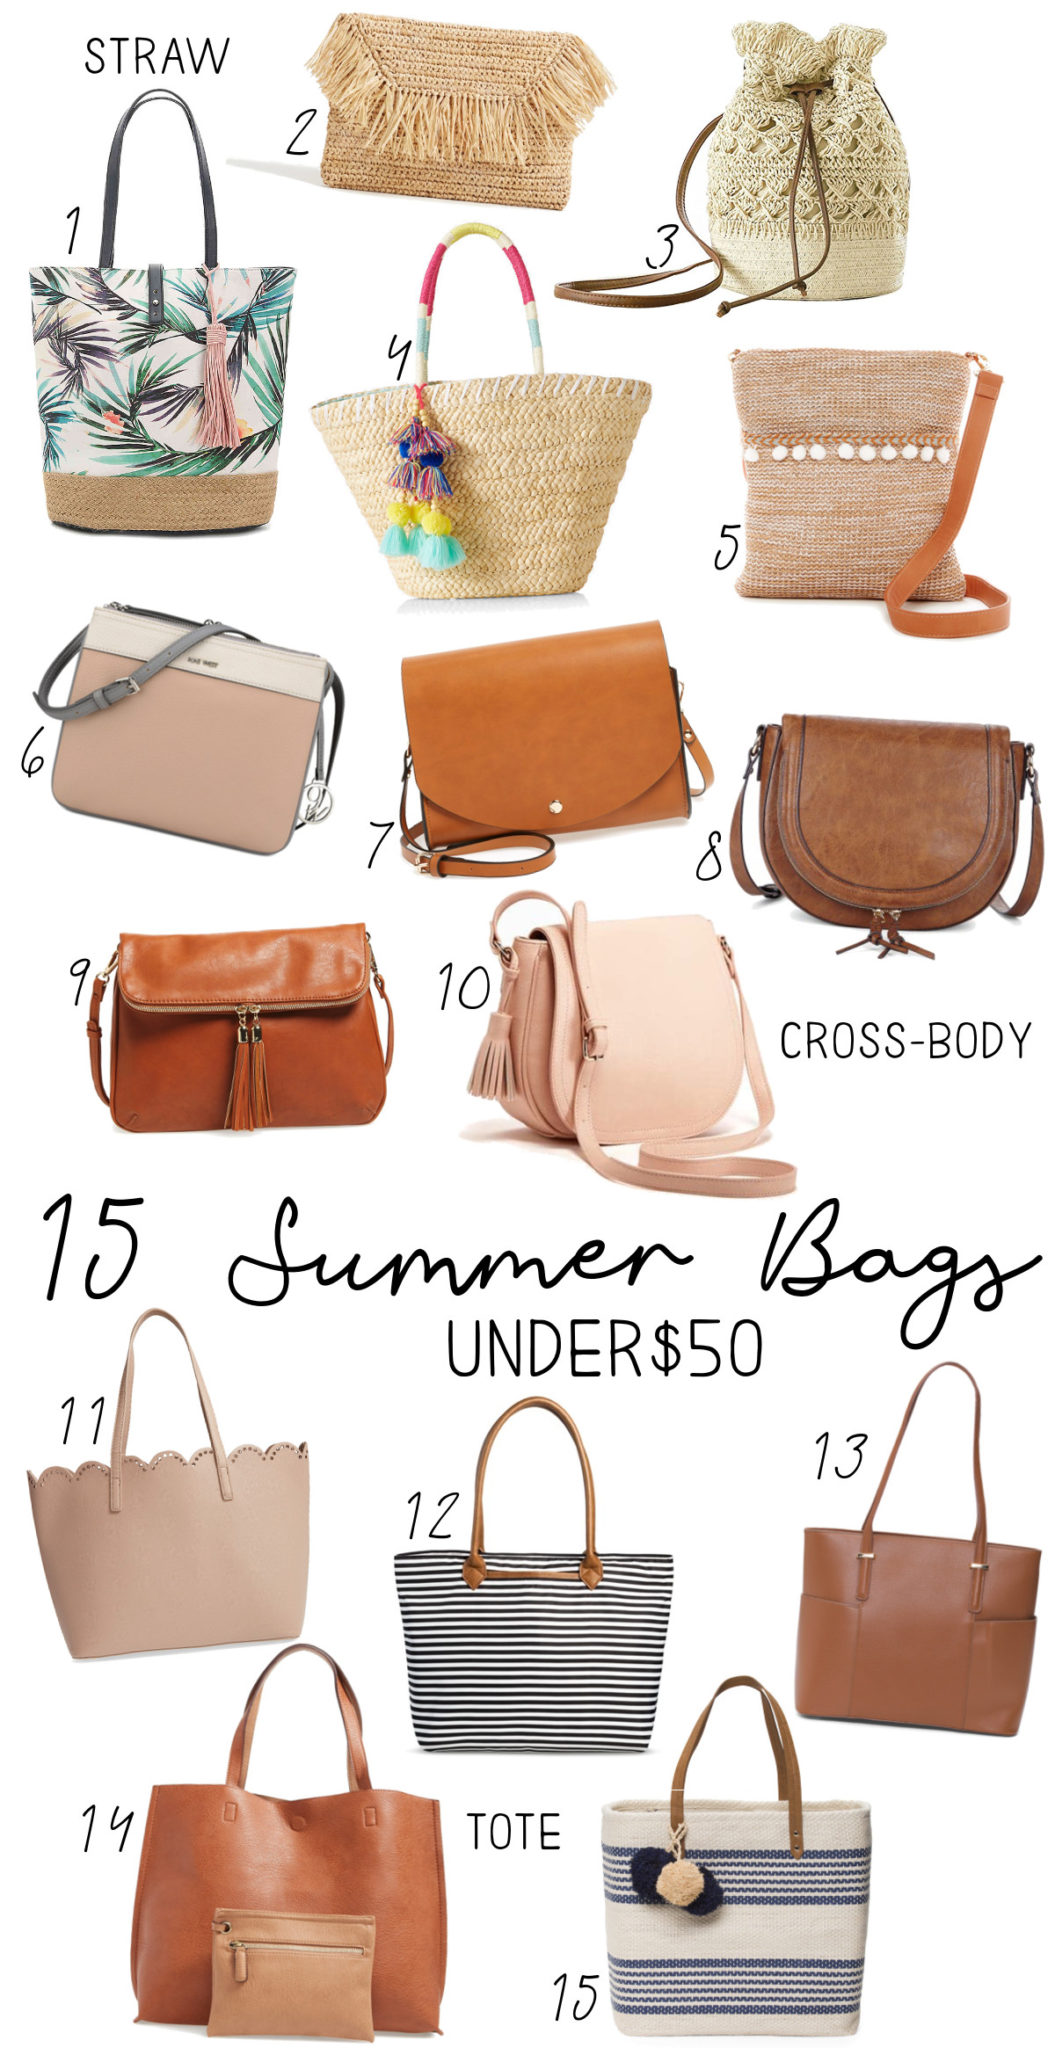 15 Summer Bags Under $50 - Affordable Straw Bags, Crossbody Bags, and Tote Bags!